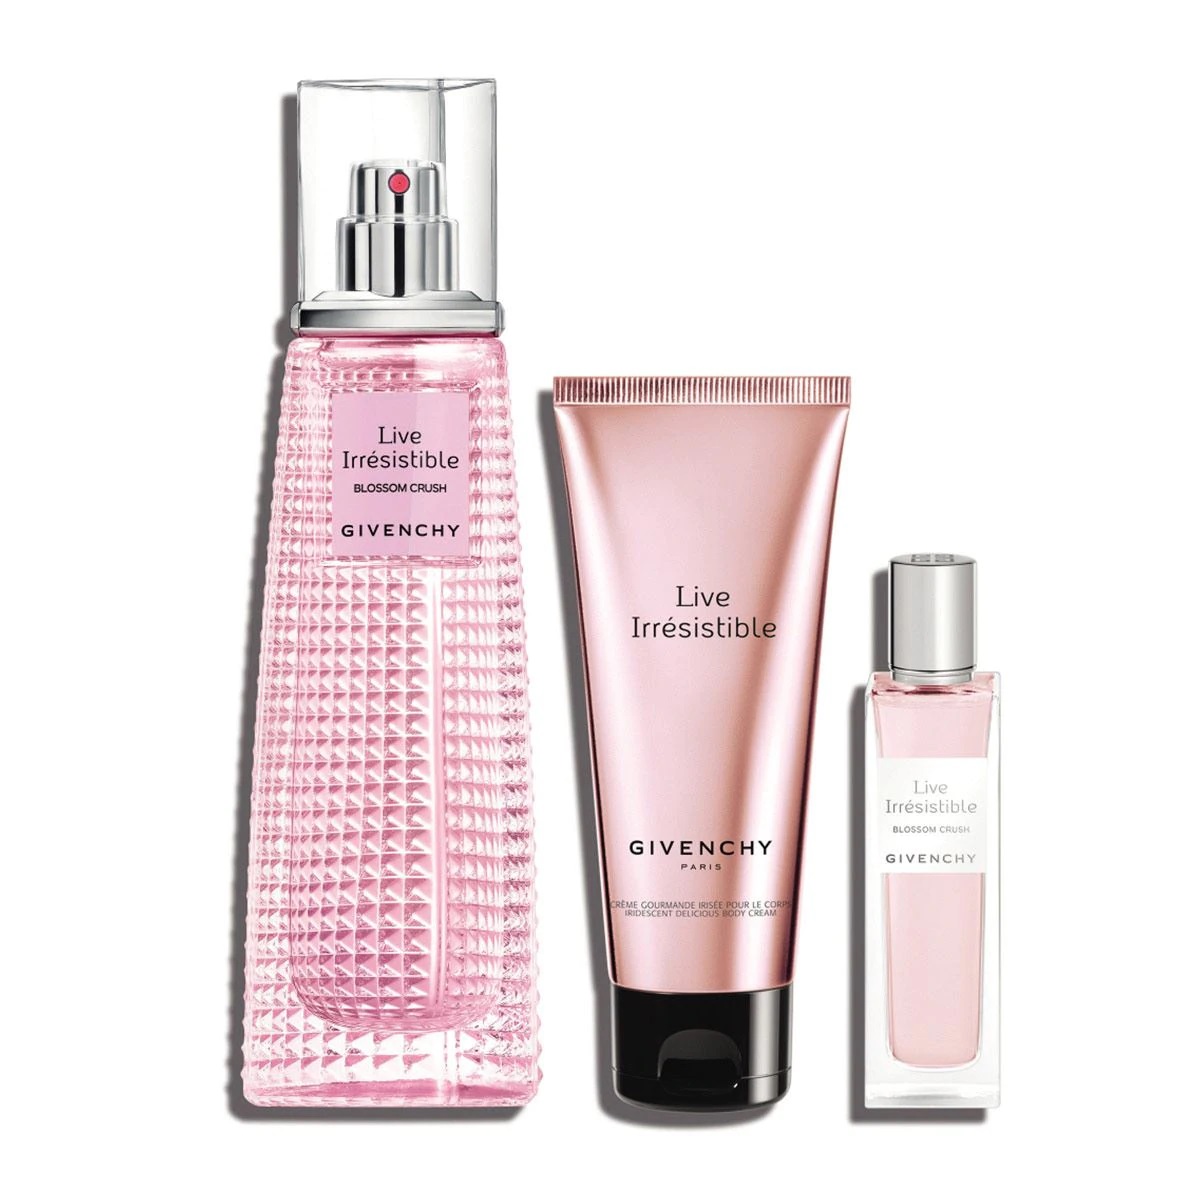 Givenchy Live Irresistible Blossom Crush /  Set (w) In Beige,black